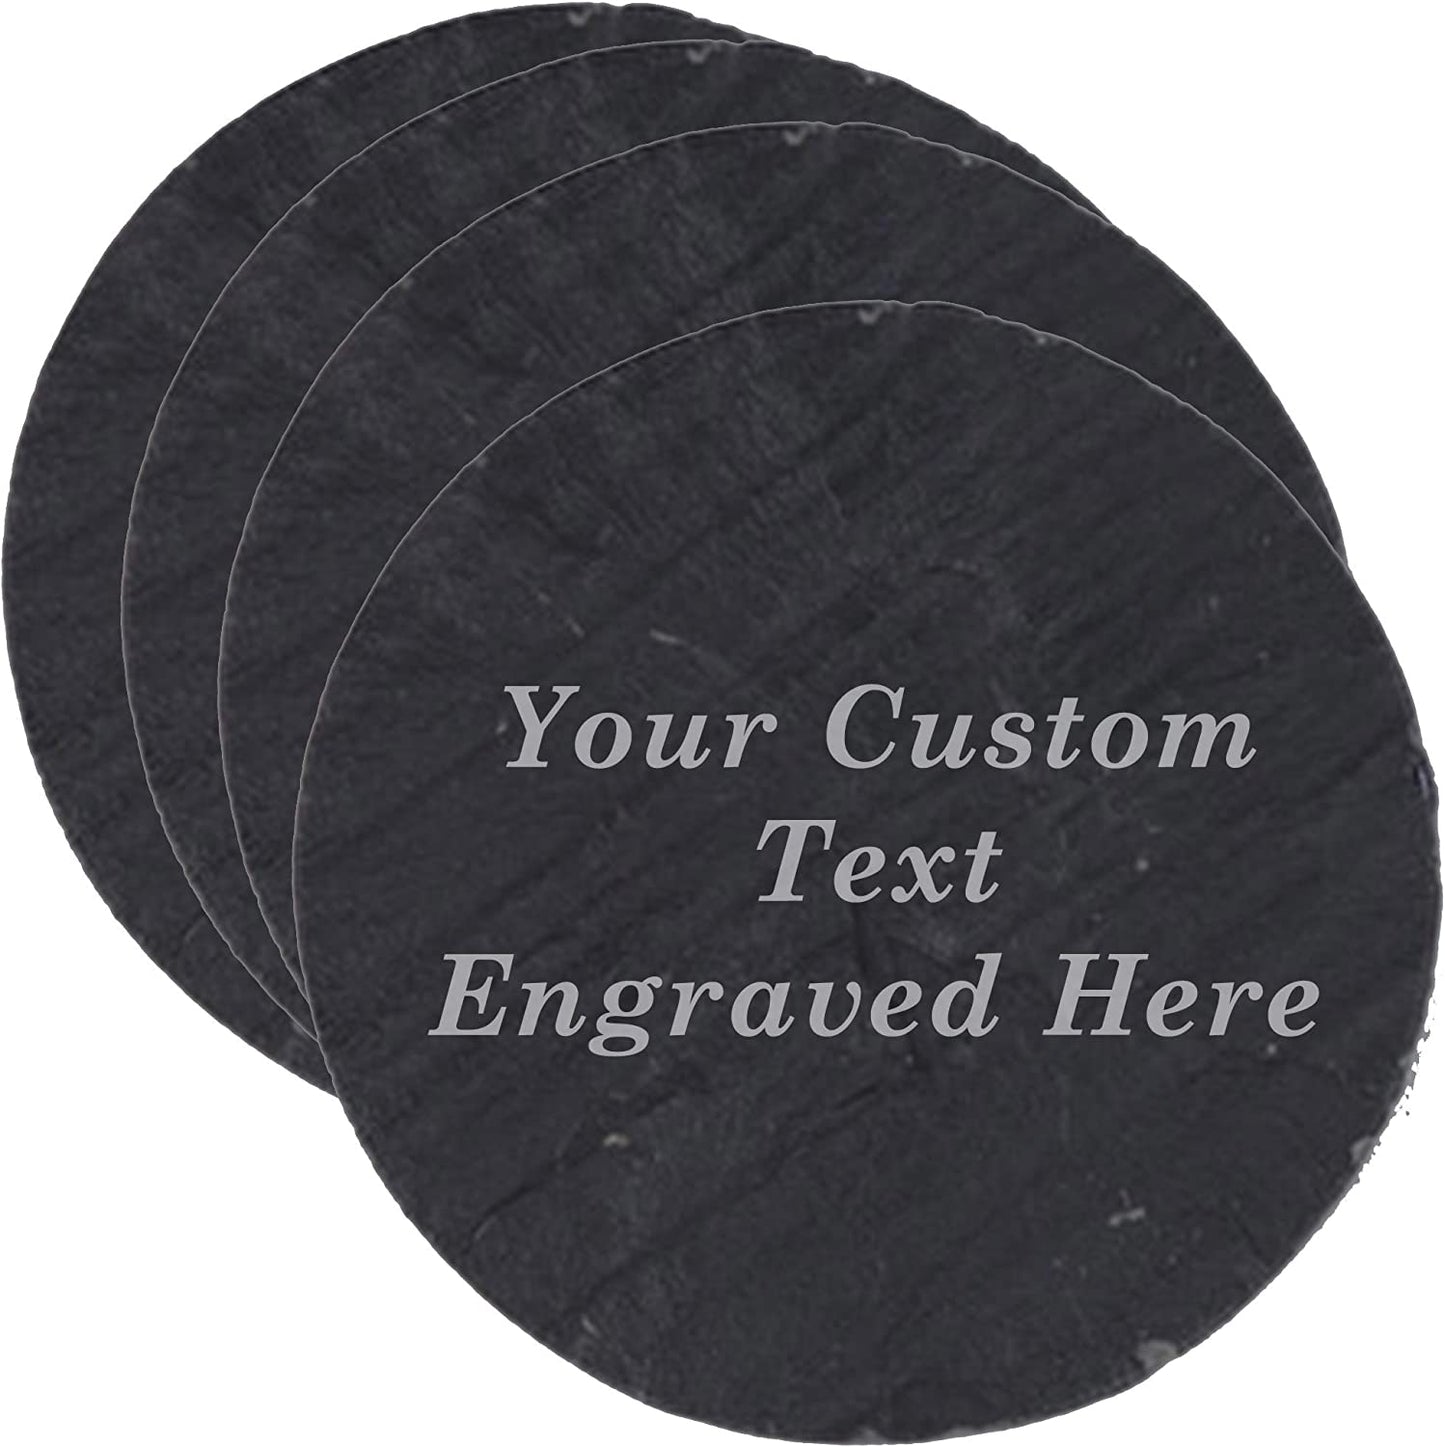 Customized Engraved Round or Square Slate Coasters, Set of 4 - Add Your Text or Logo